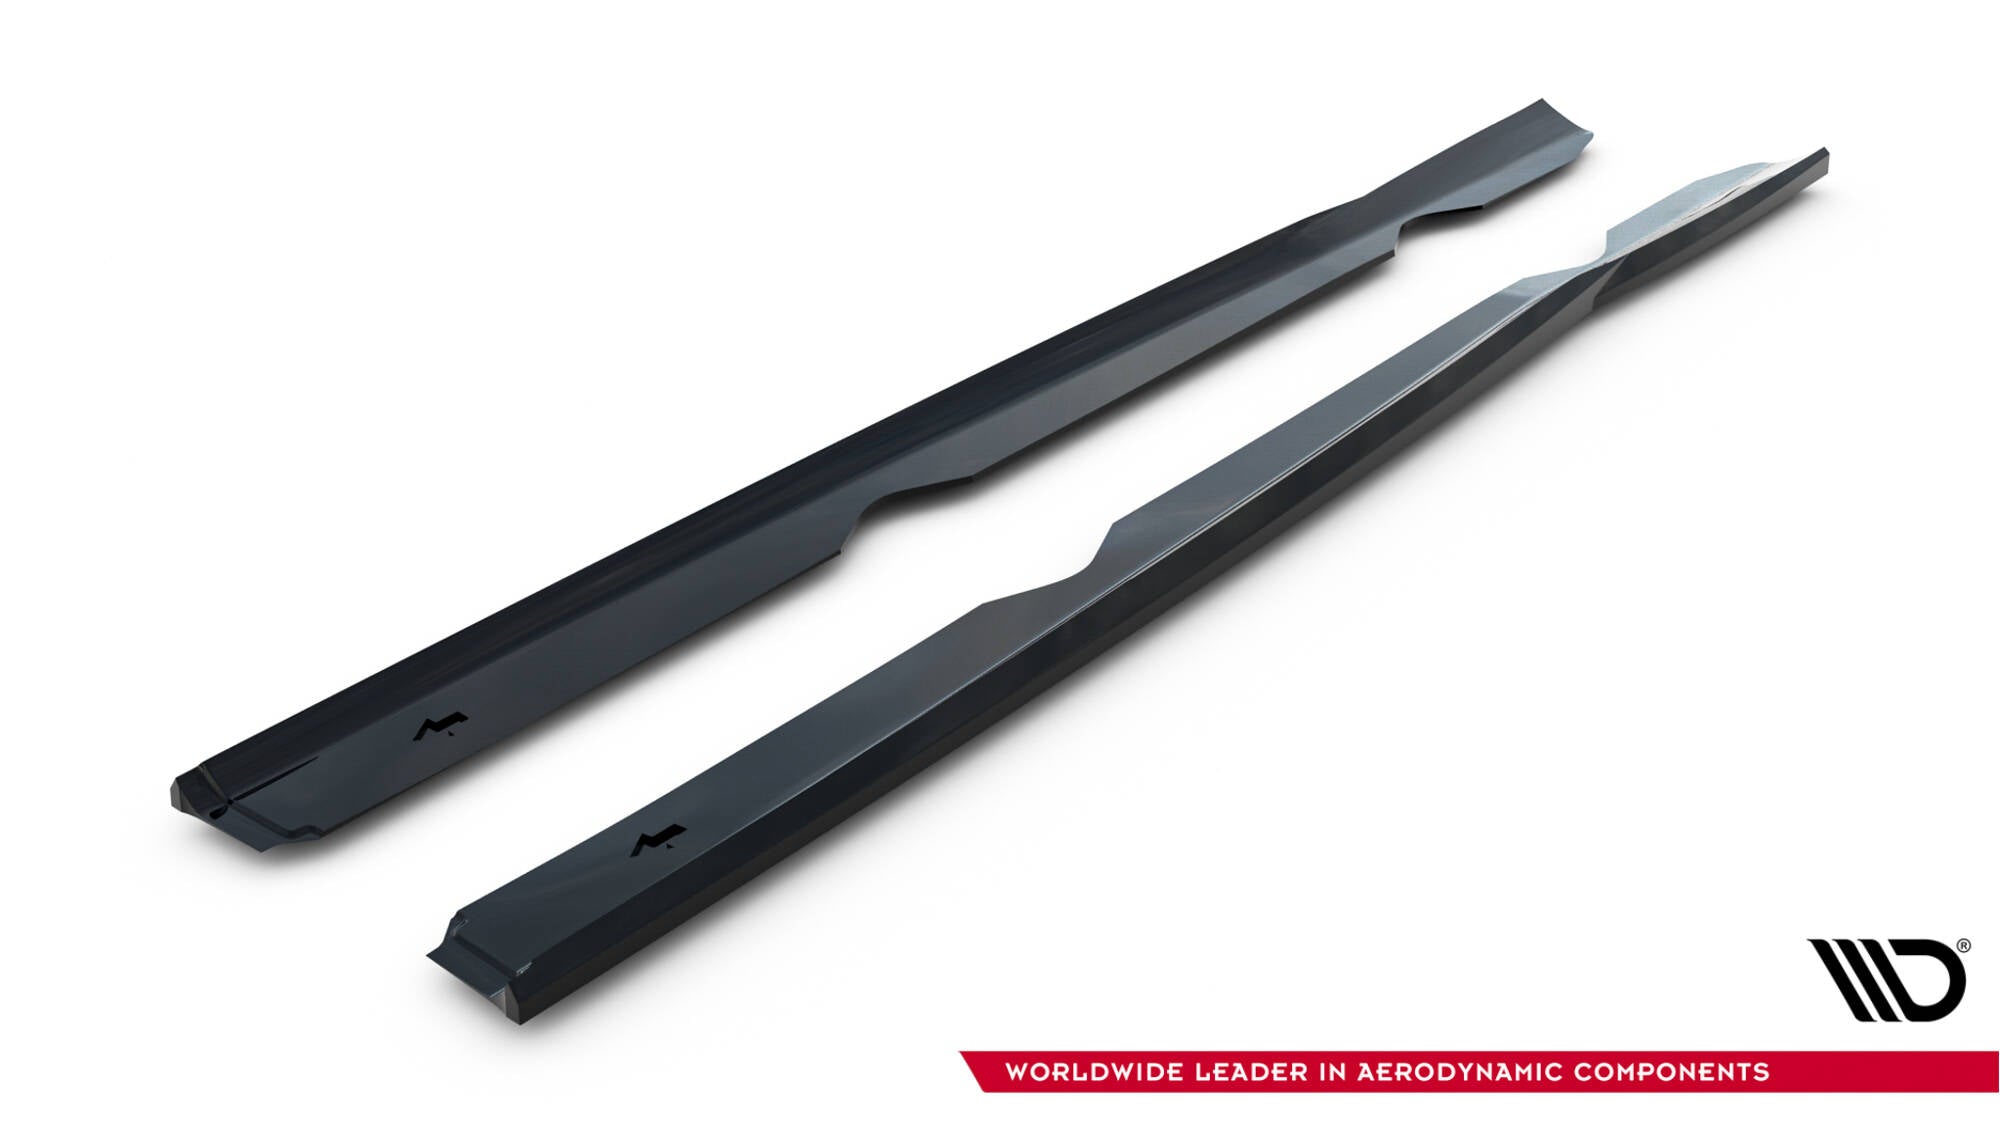 Side Skirts Diffusers V.4 Ford Fiesta ST / ST-Line Mk7